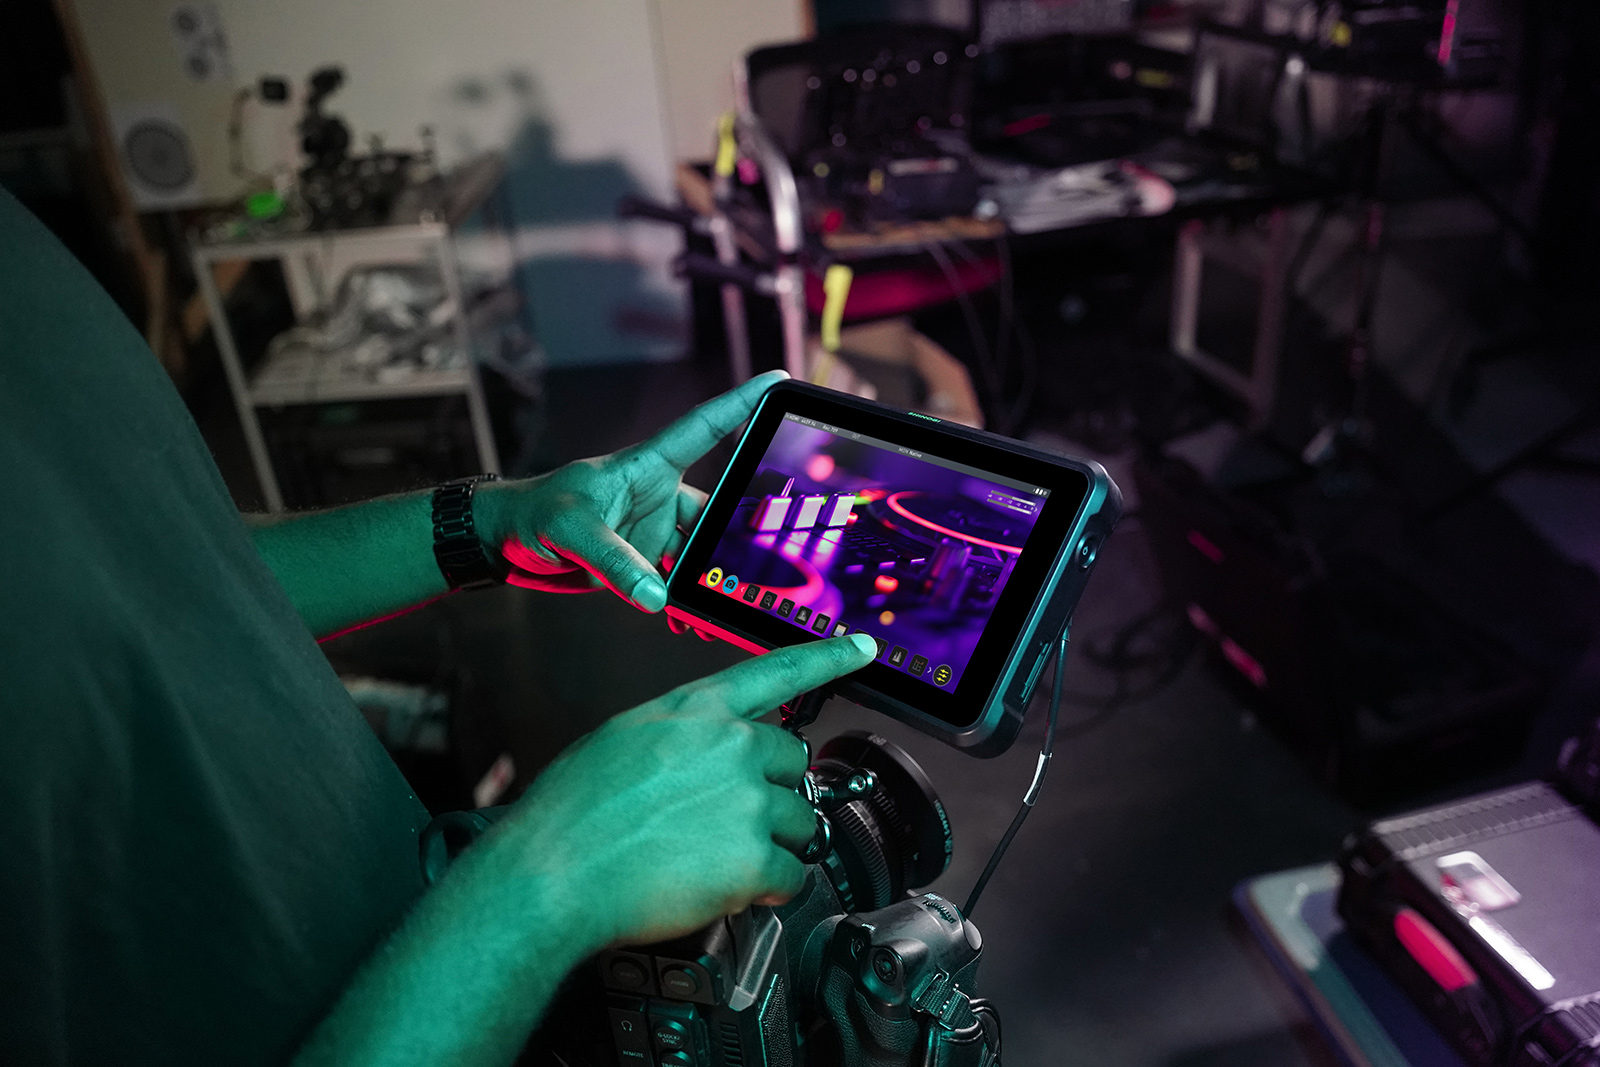 Atomos Shinobi 7 promotional image showing man utilizing the touch function on an on-camera monitor setup with equipment in the background.